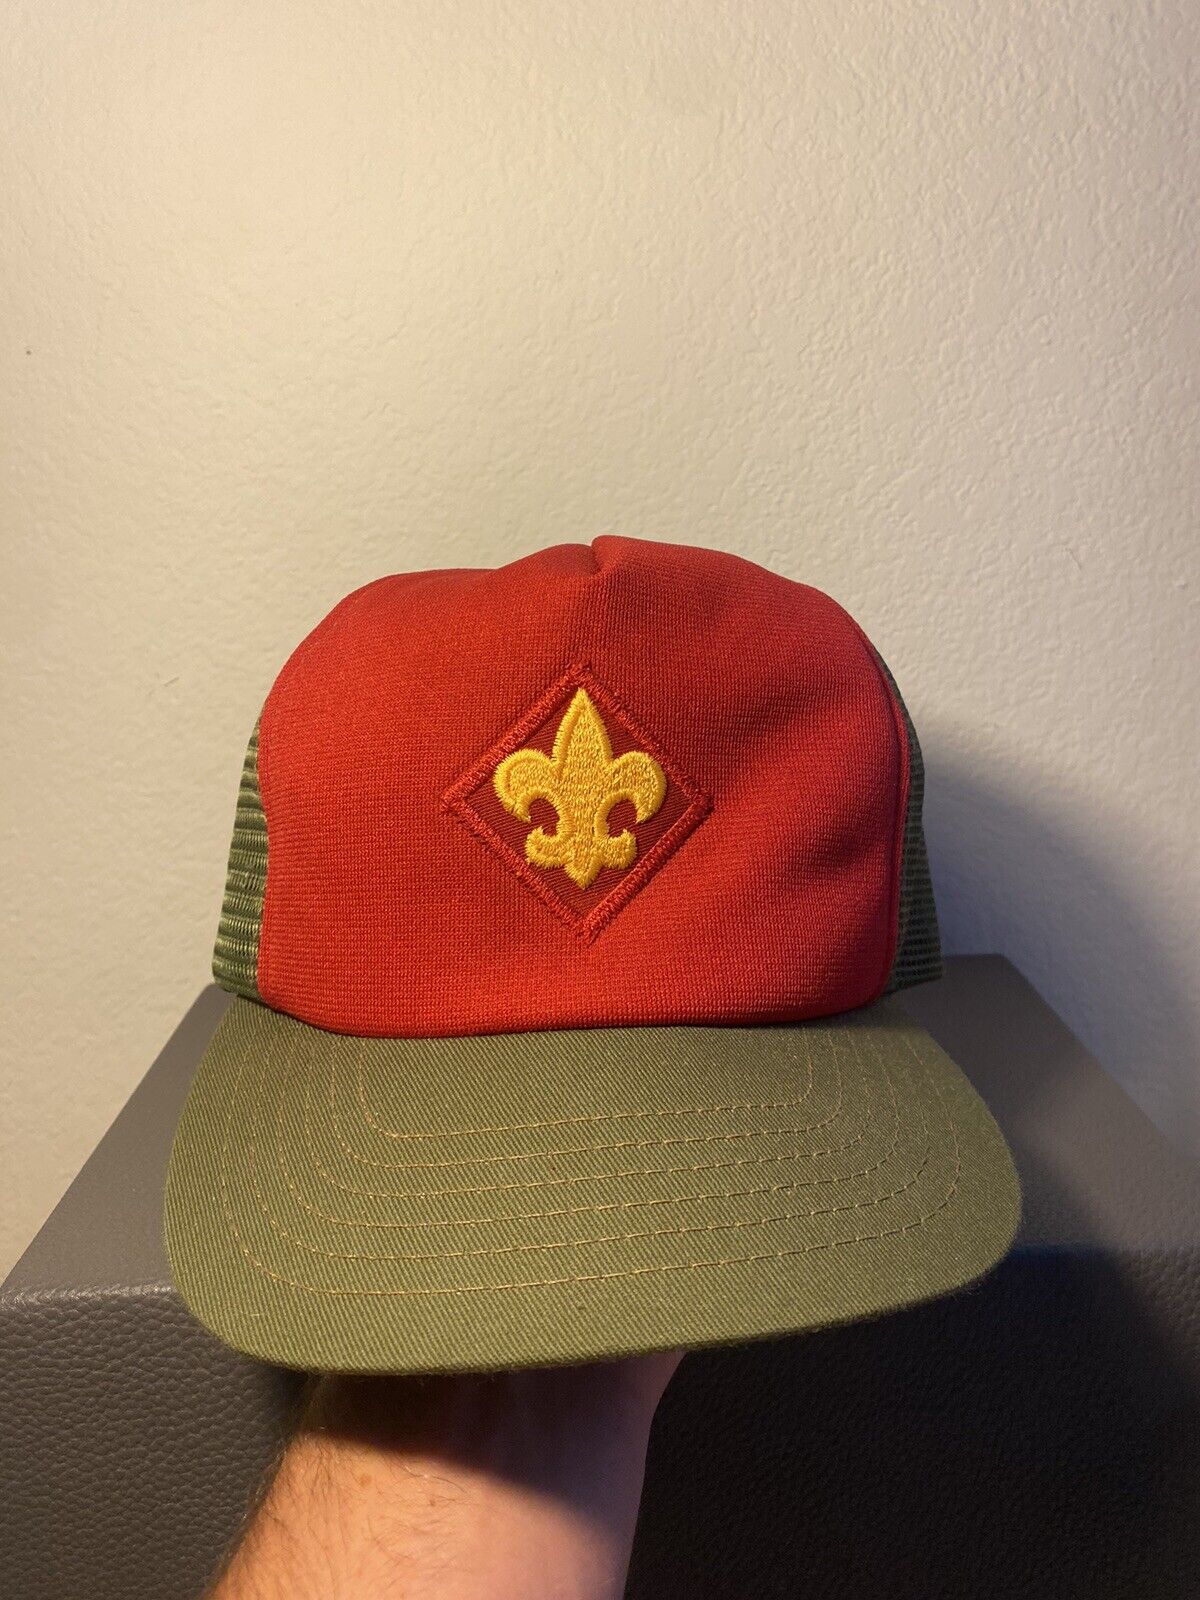 Vintage 80's Boy Scouts Snapback Trucker Hat  Adjustable One Size Fits All